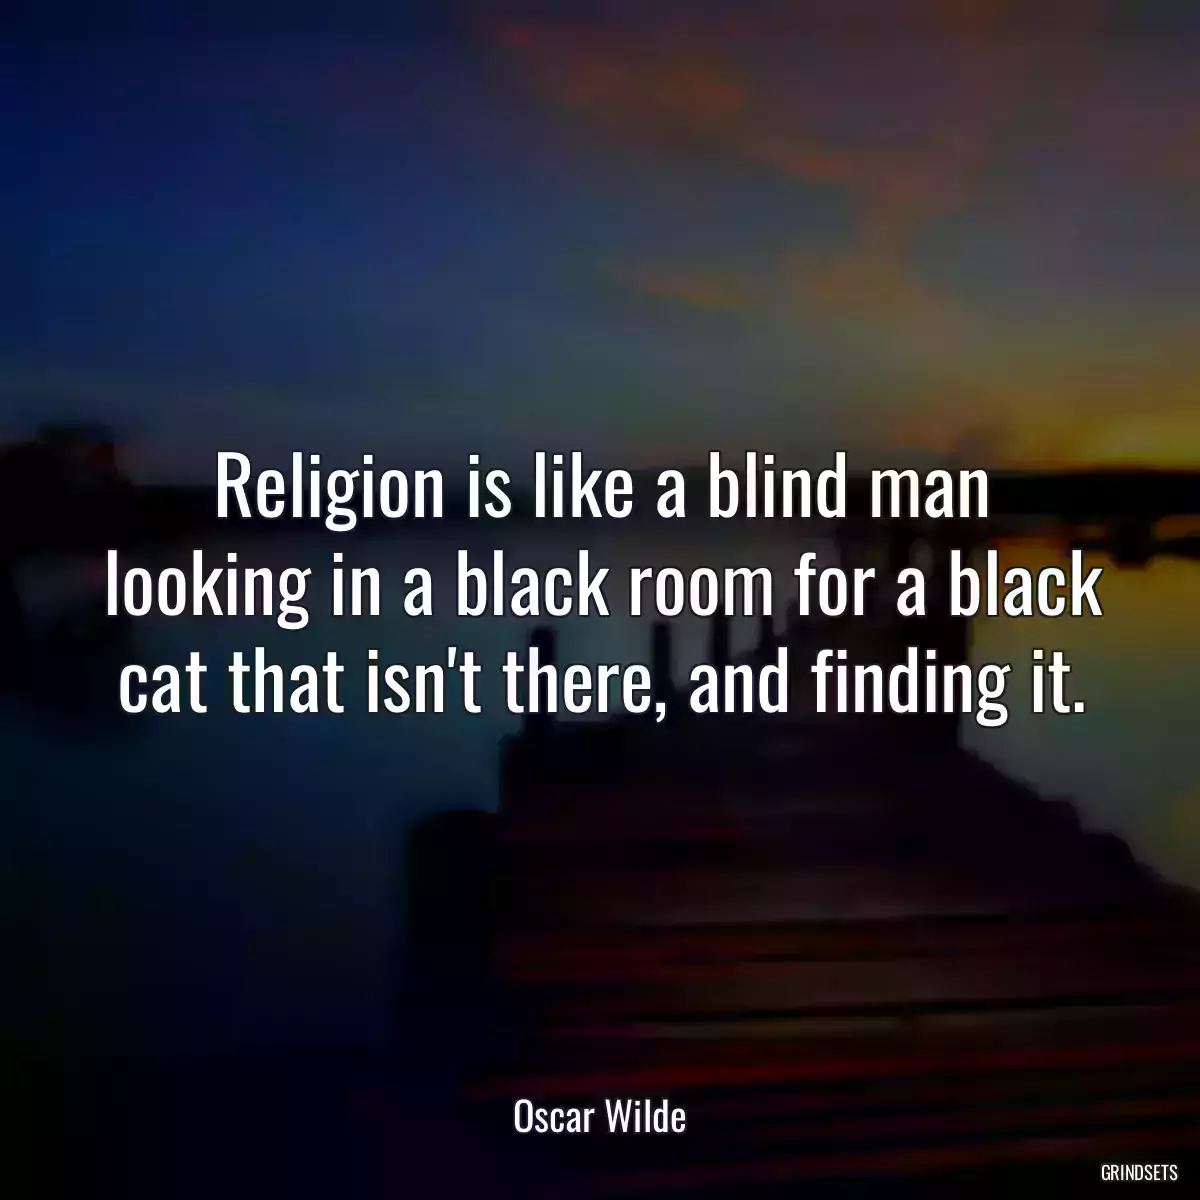 Religion is like a blind man looking in a black room for a black cat that isn\'t there, and finding it.